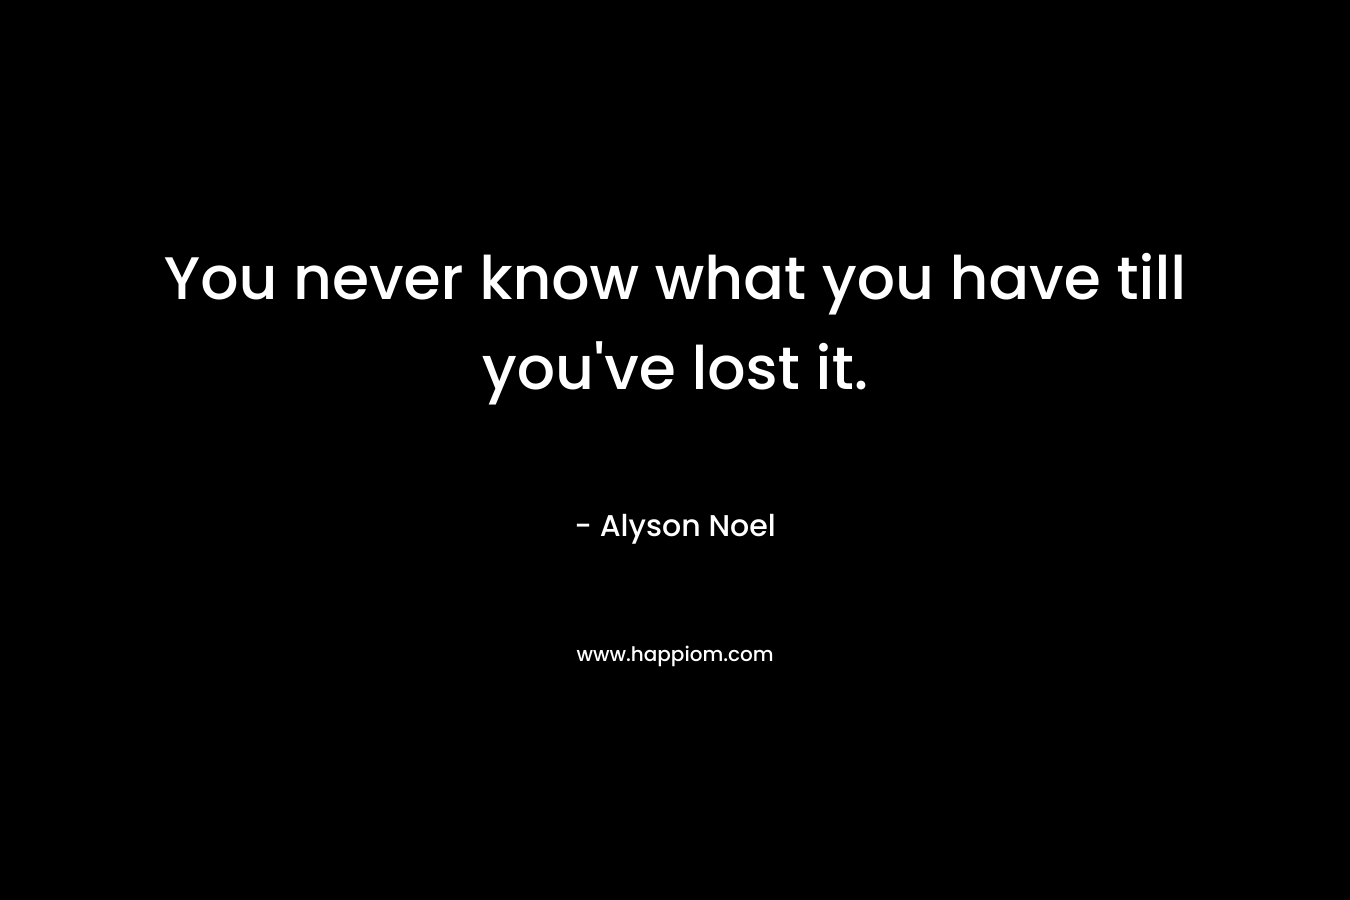 You never know what you have till you’ve lost it. – Alyson Noel